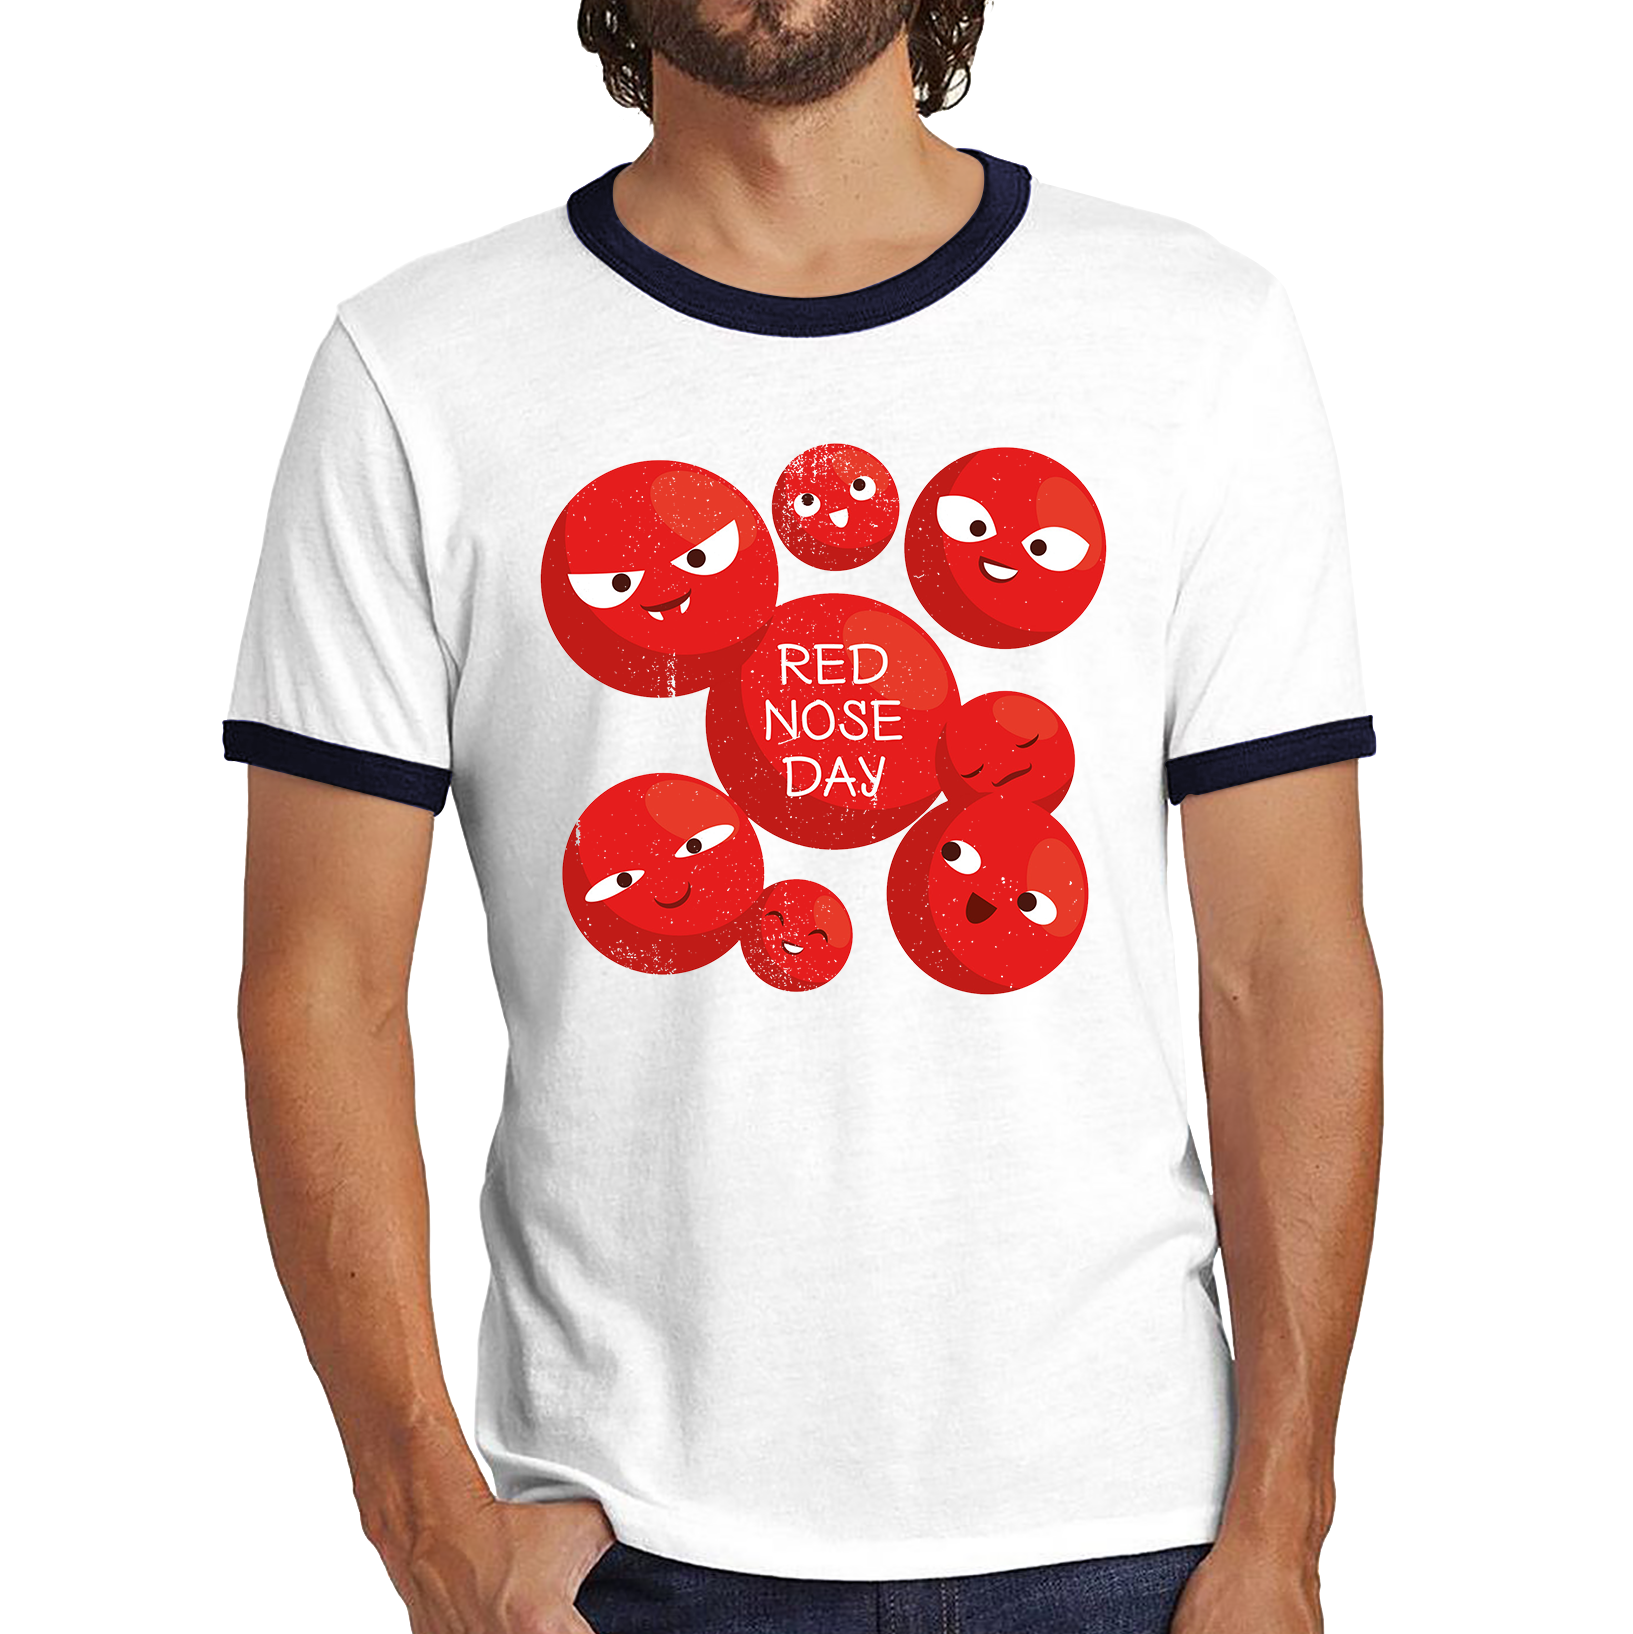 Red Nose Day Funny Noses Ringer T Shirt. 50% Goes To Charity